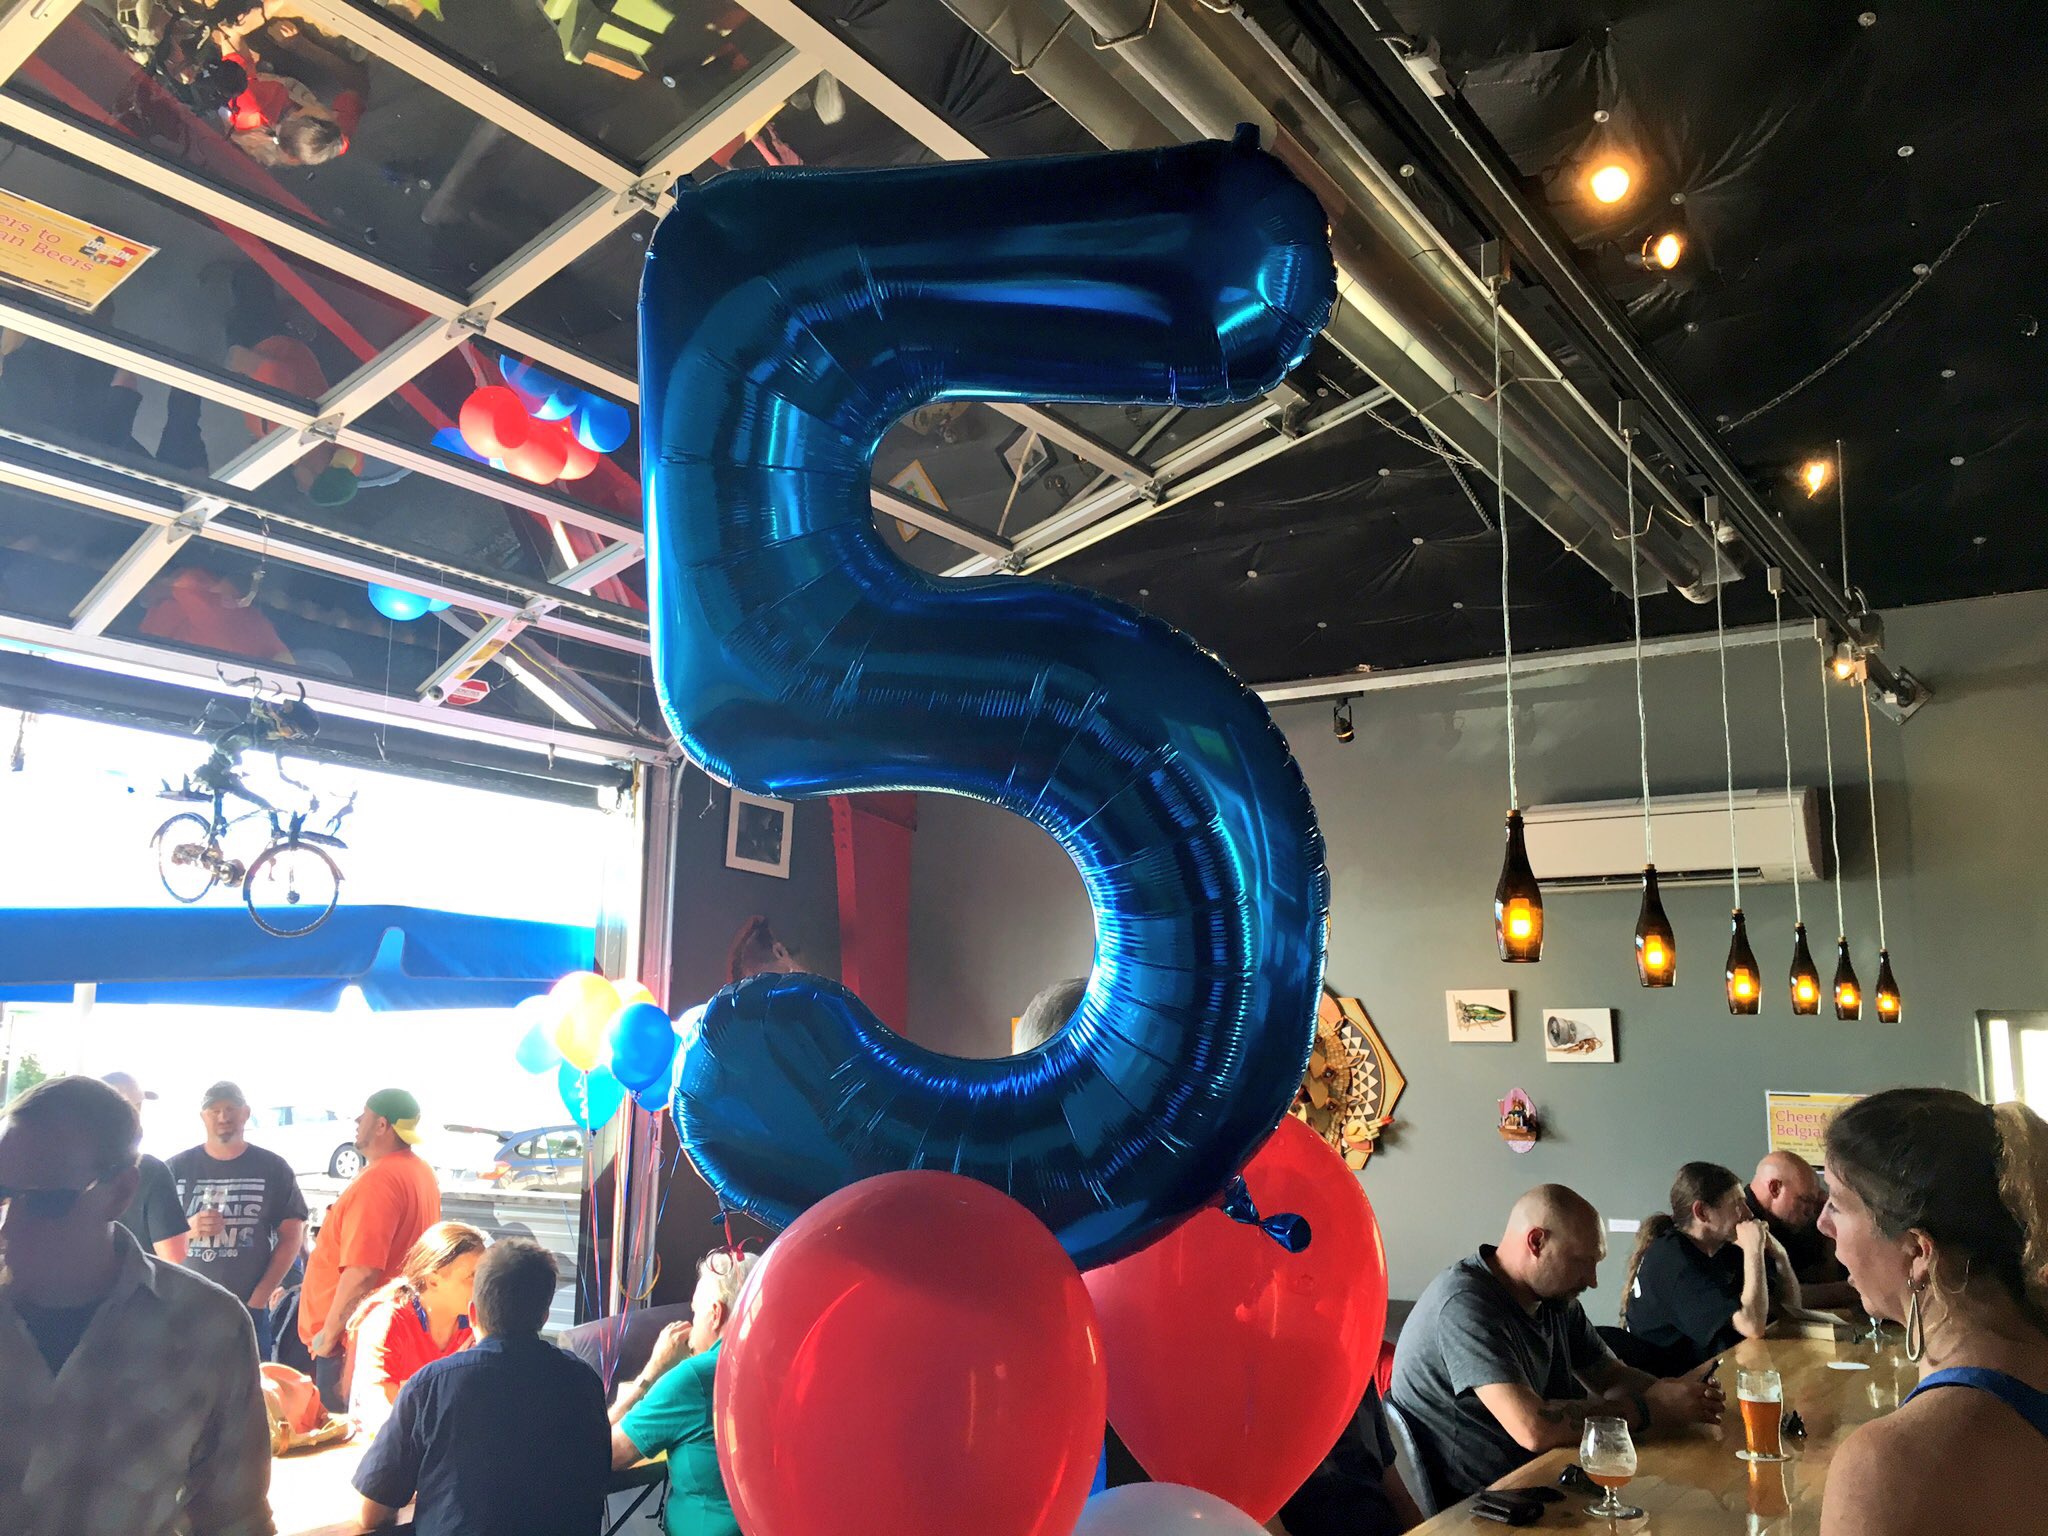 In May Gigantic Brewing celebrated its 5th Anniversary. The brewer re-released its most popular beers from the past five years that continues through mid 2018.